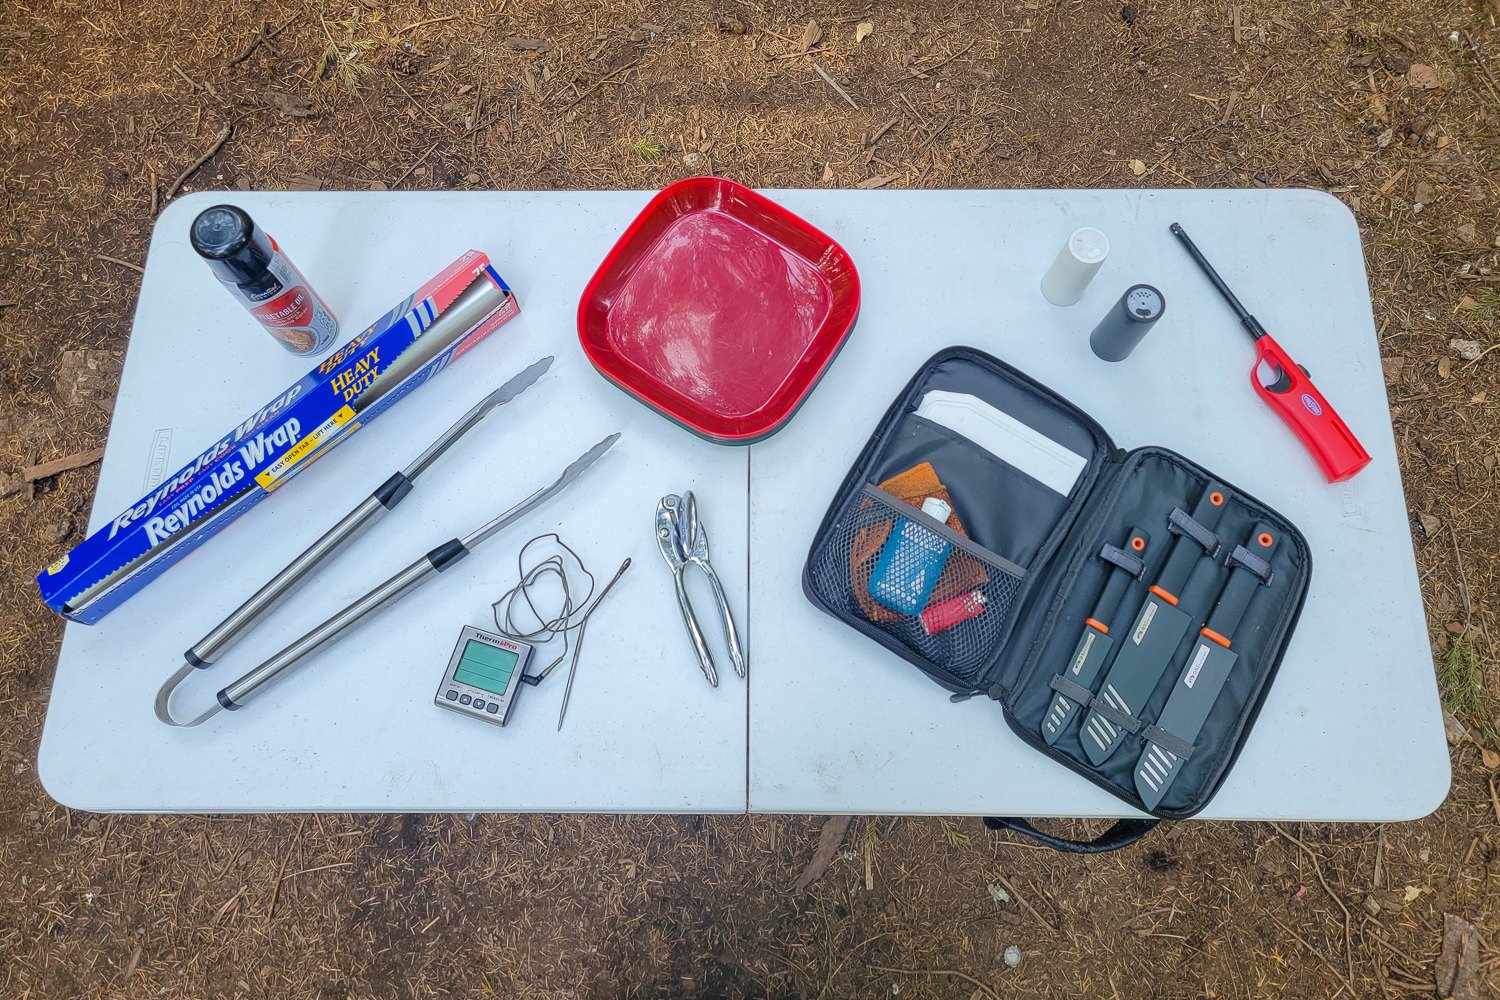 A camping table with foil, non-stick cooking spray, tongs, a meat thermometer, can opener, plates, camping knife set, salt and pepper, and a lighter laid out